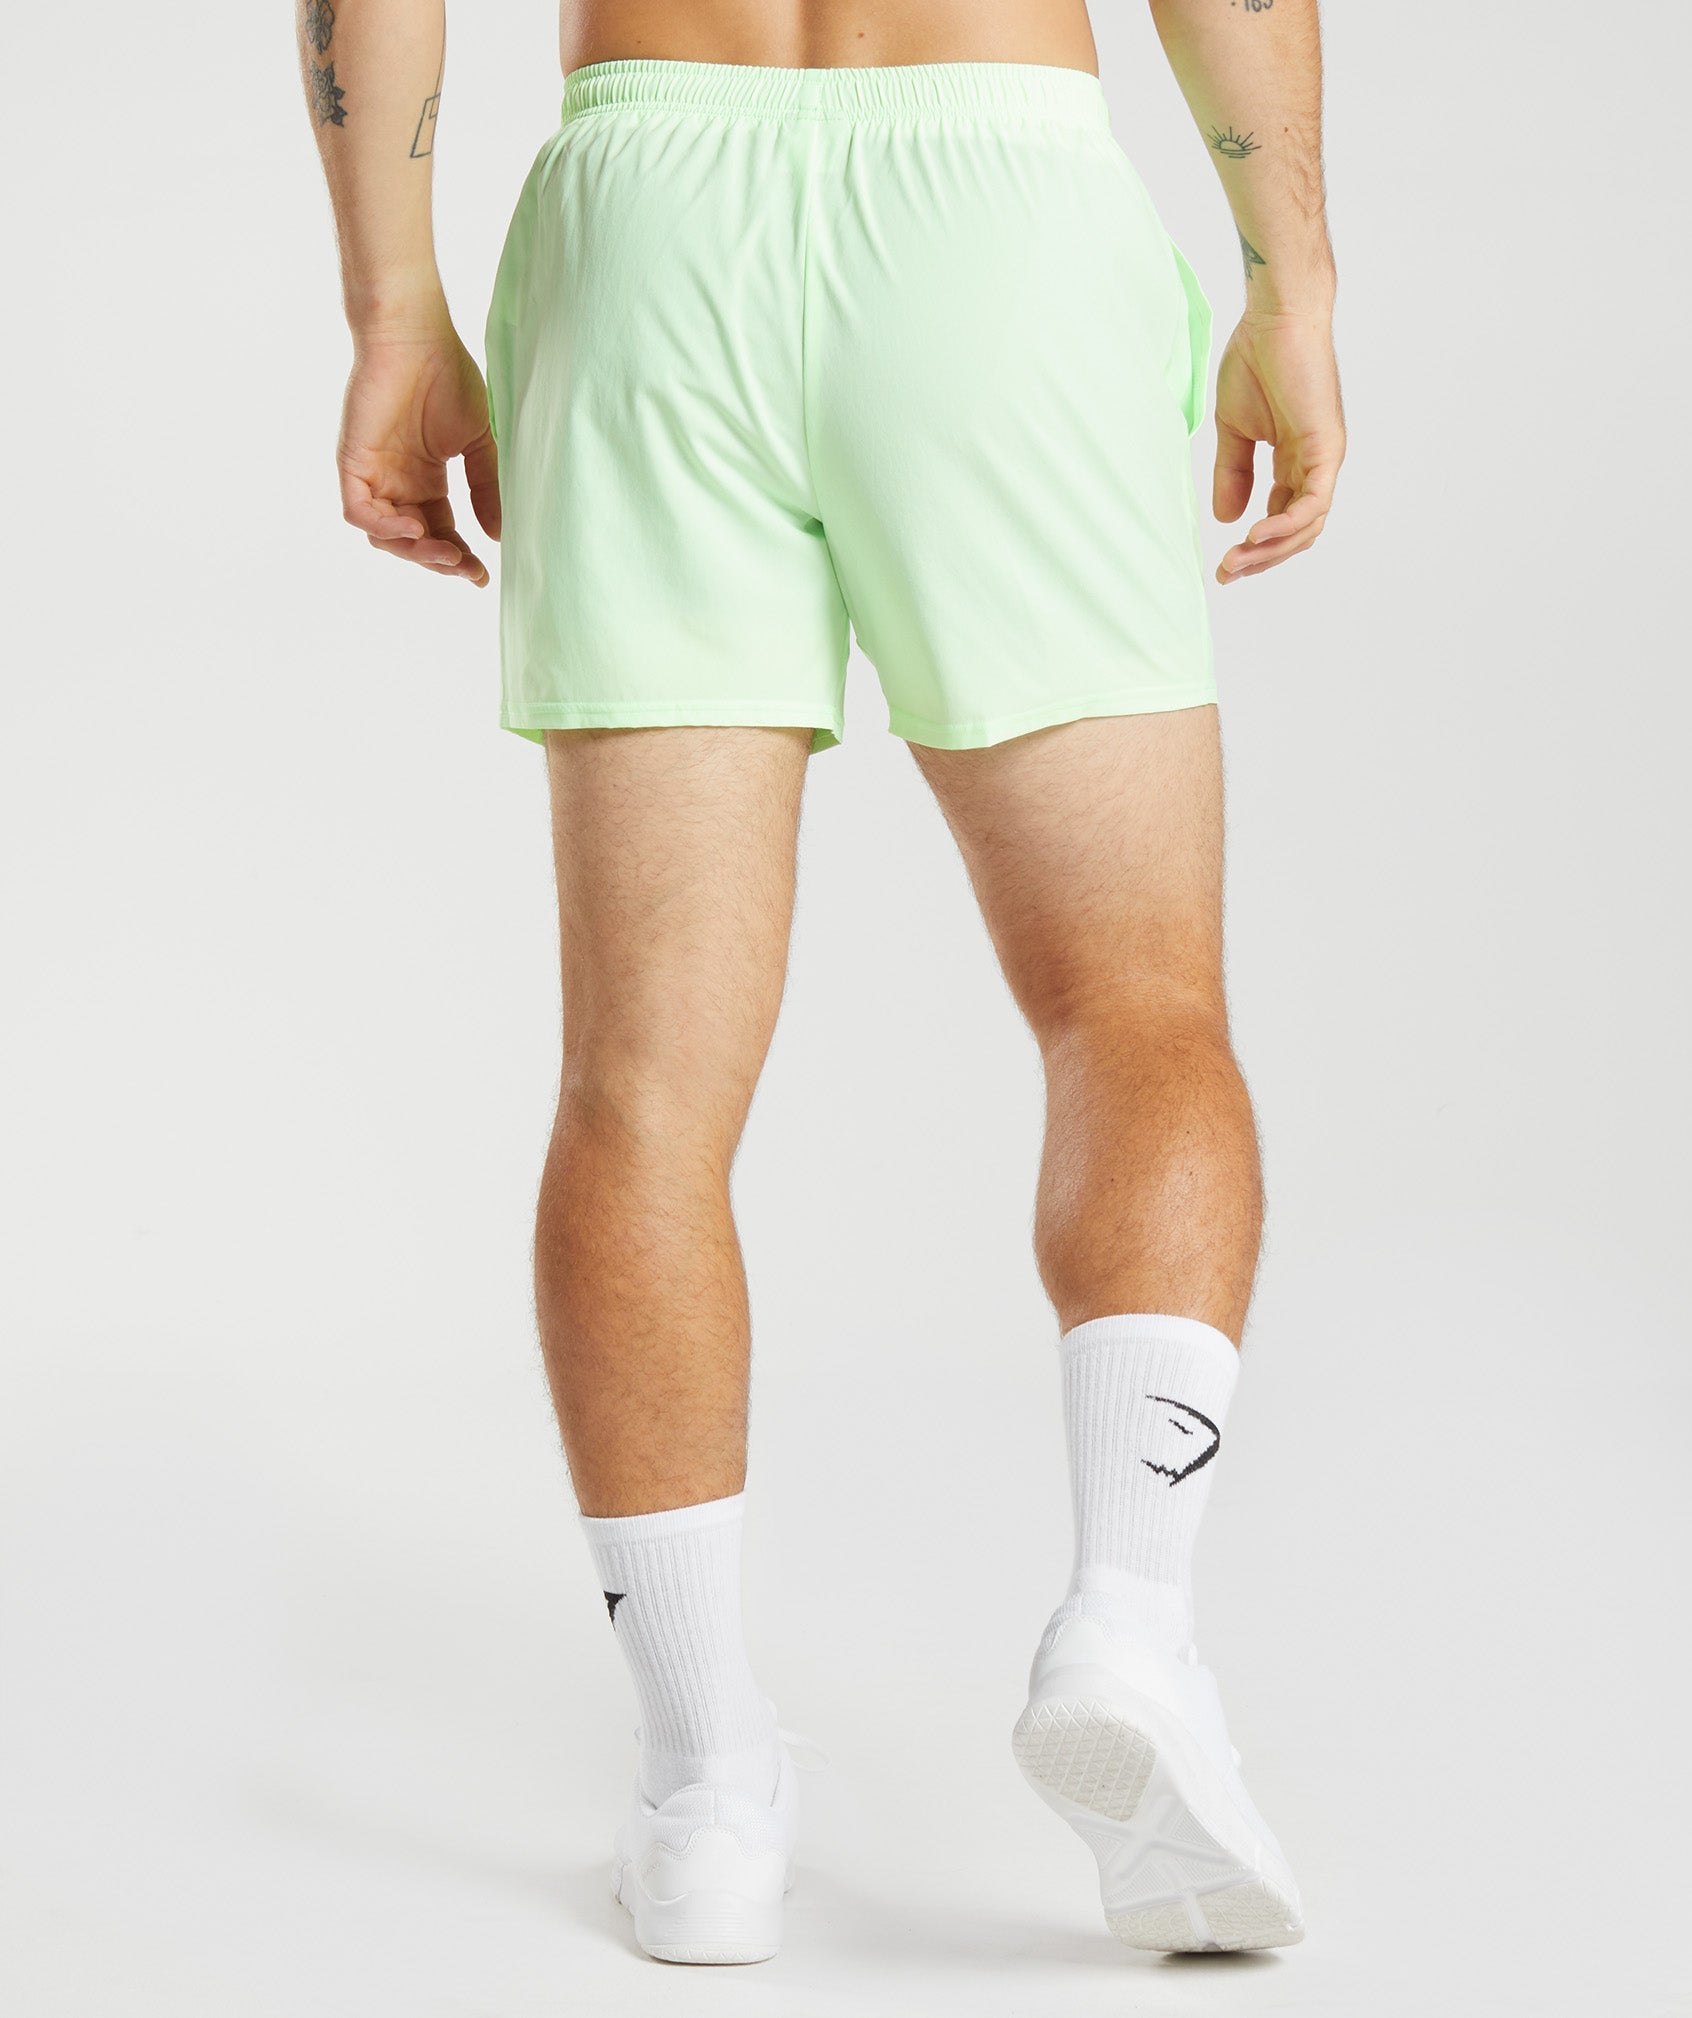 Arrival 5" Shorts in Fluo Mint - view 2